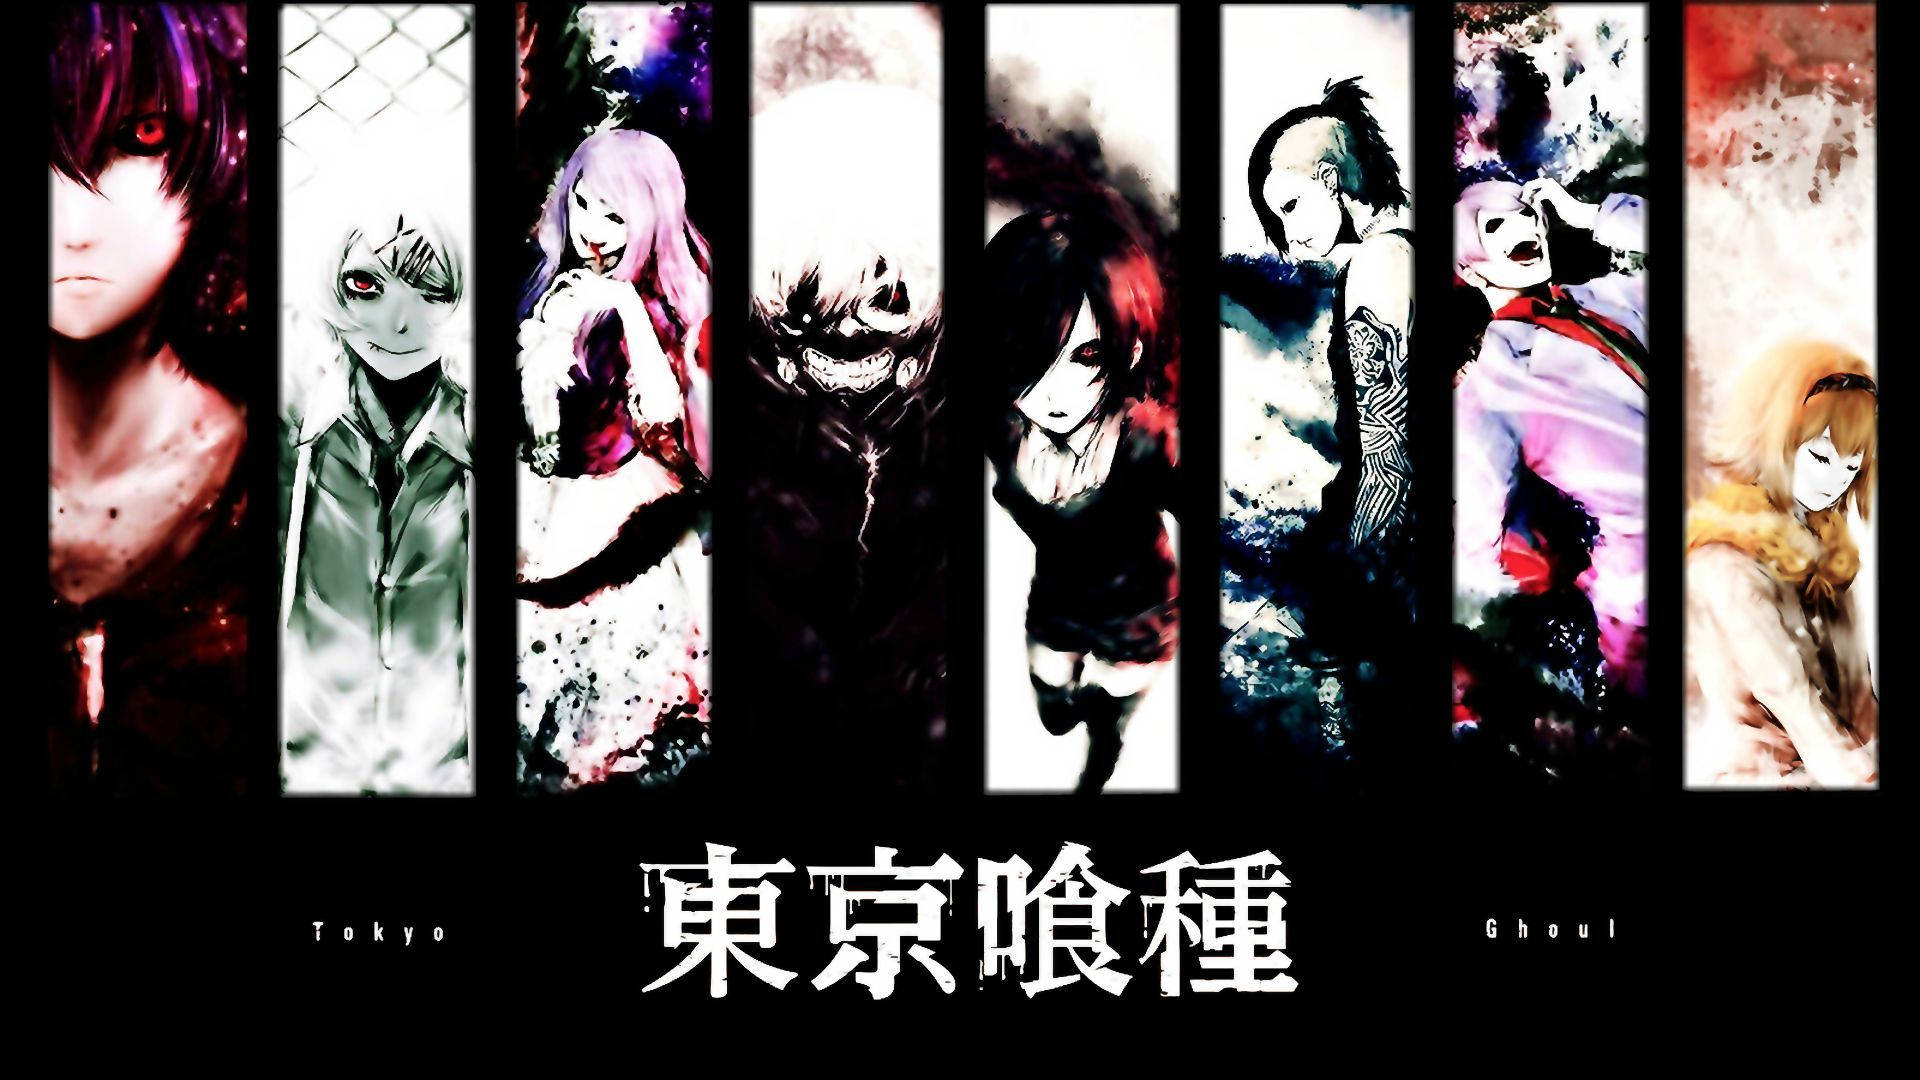 Tokyo Ghoul Characters With Japanese Text Wallpaper